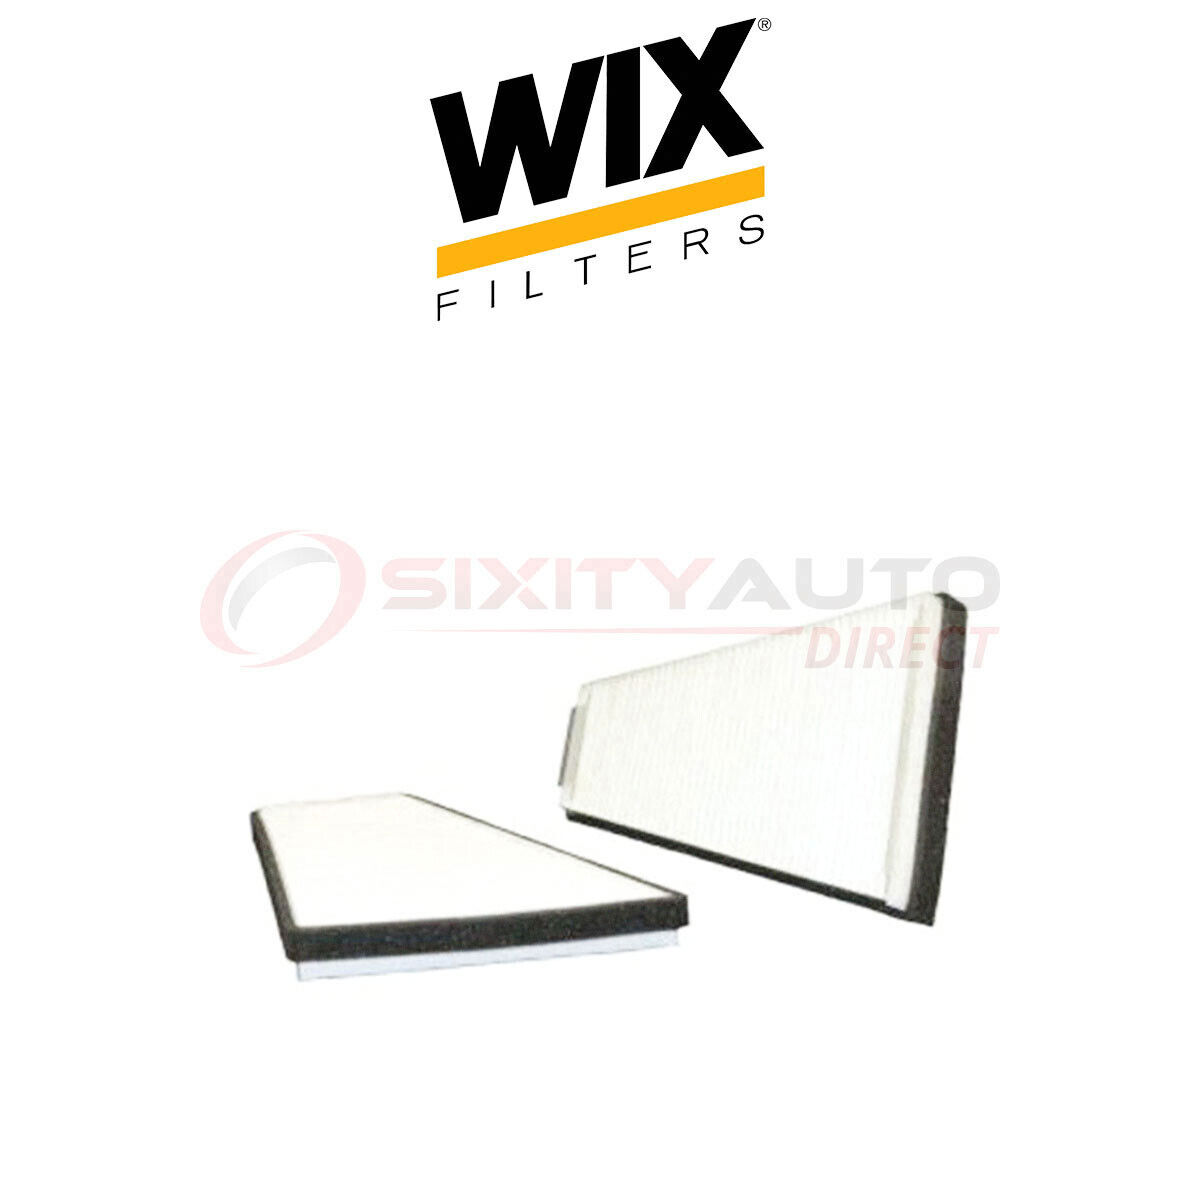 WIX 24773 Cabin Air Filter for Filtration System xm